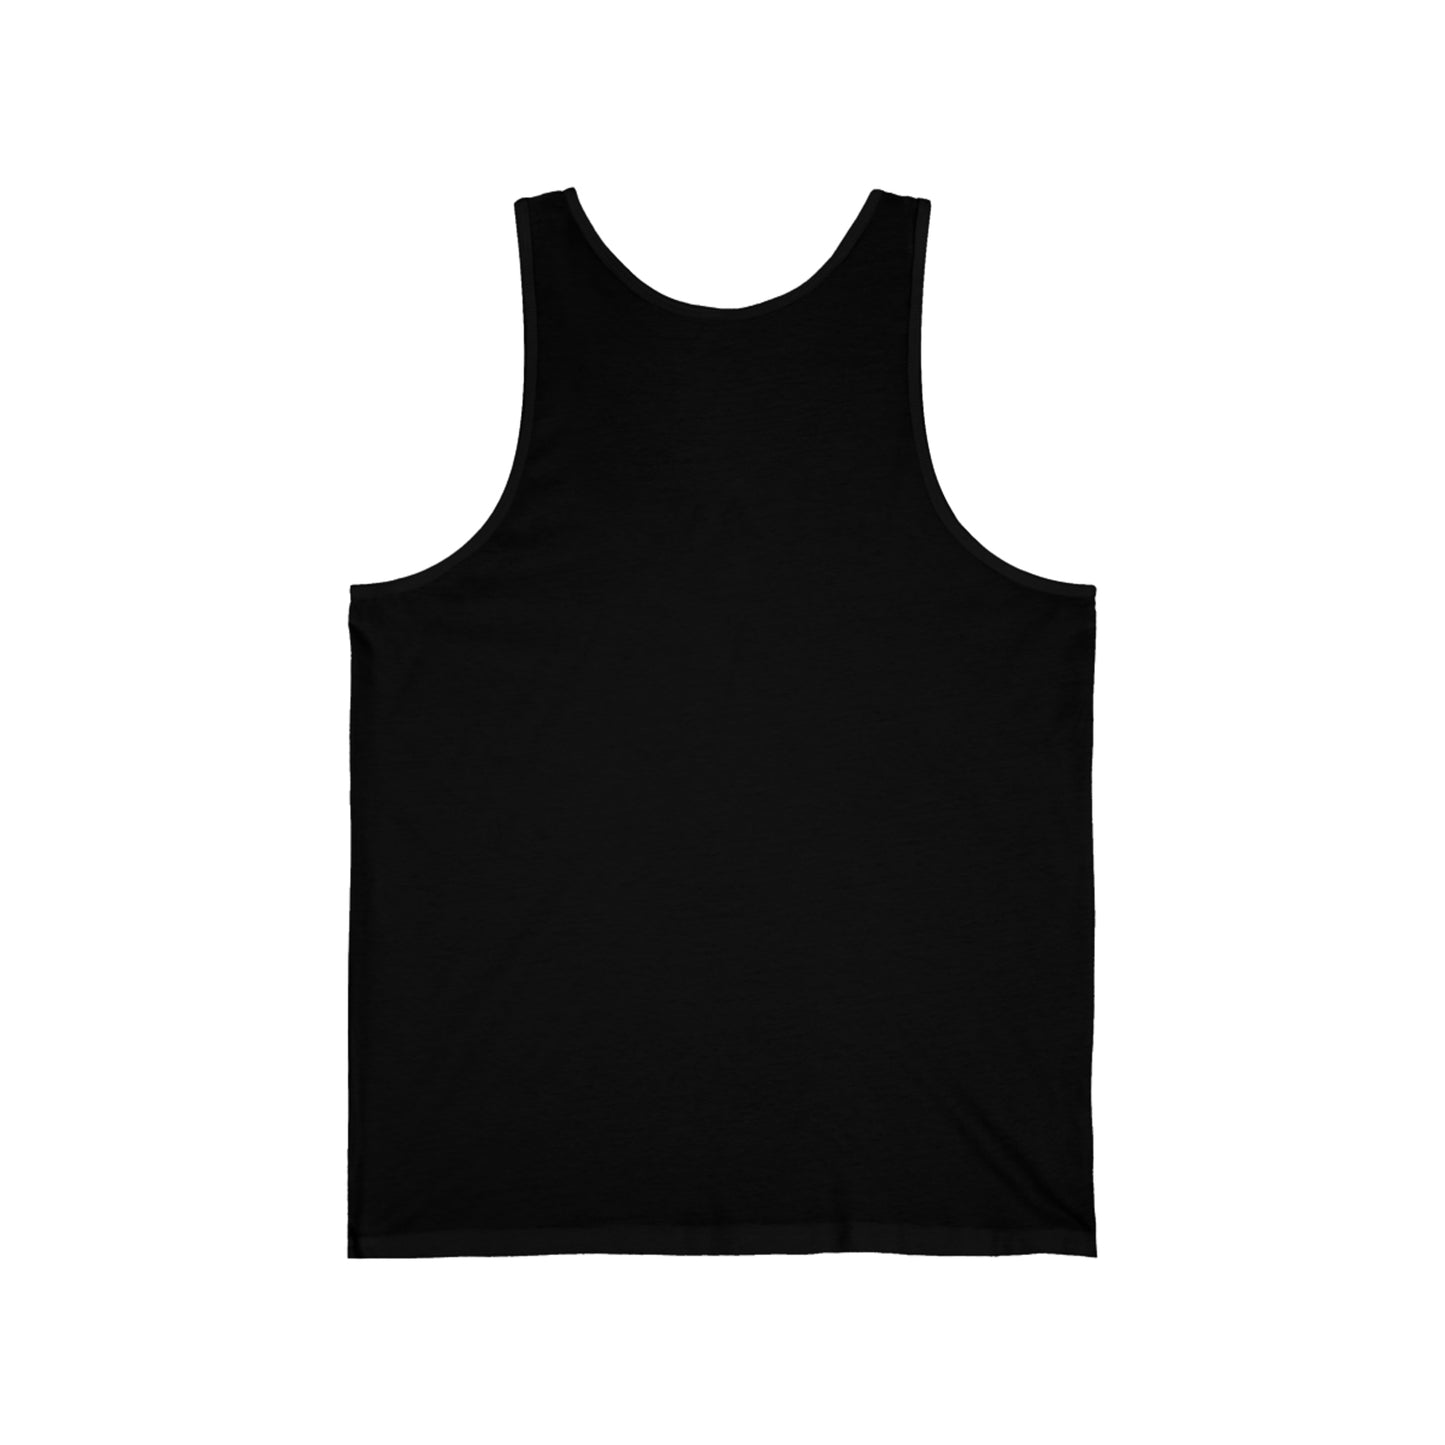 Palestinian Roots Design 1: Tank Top